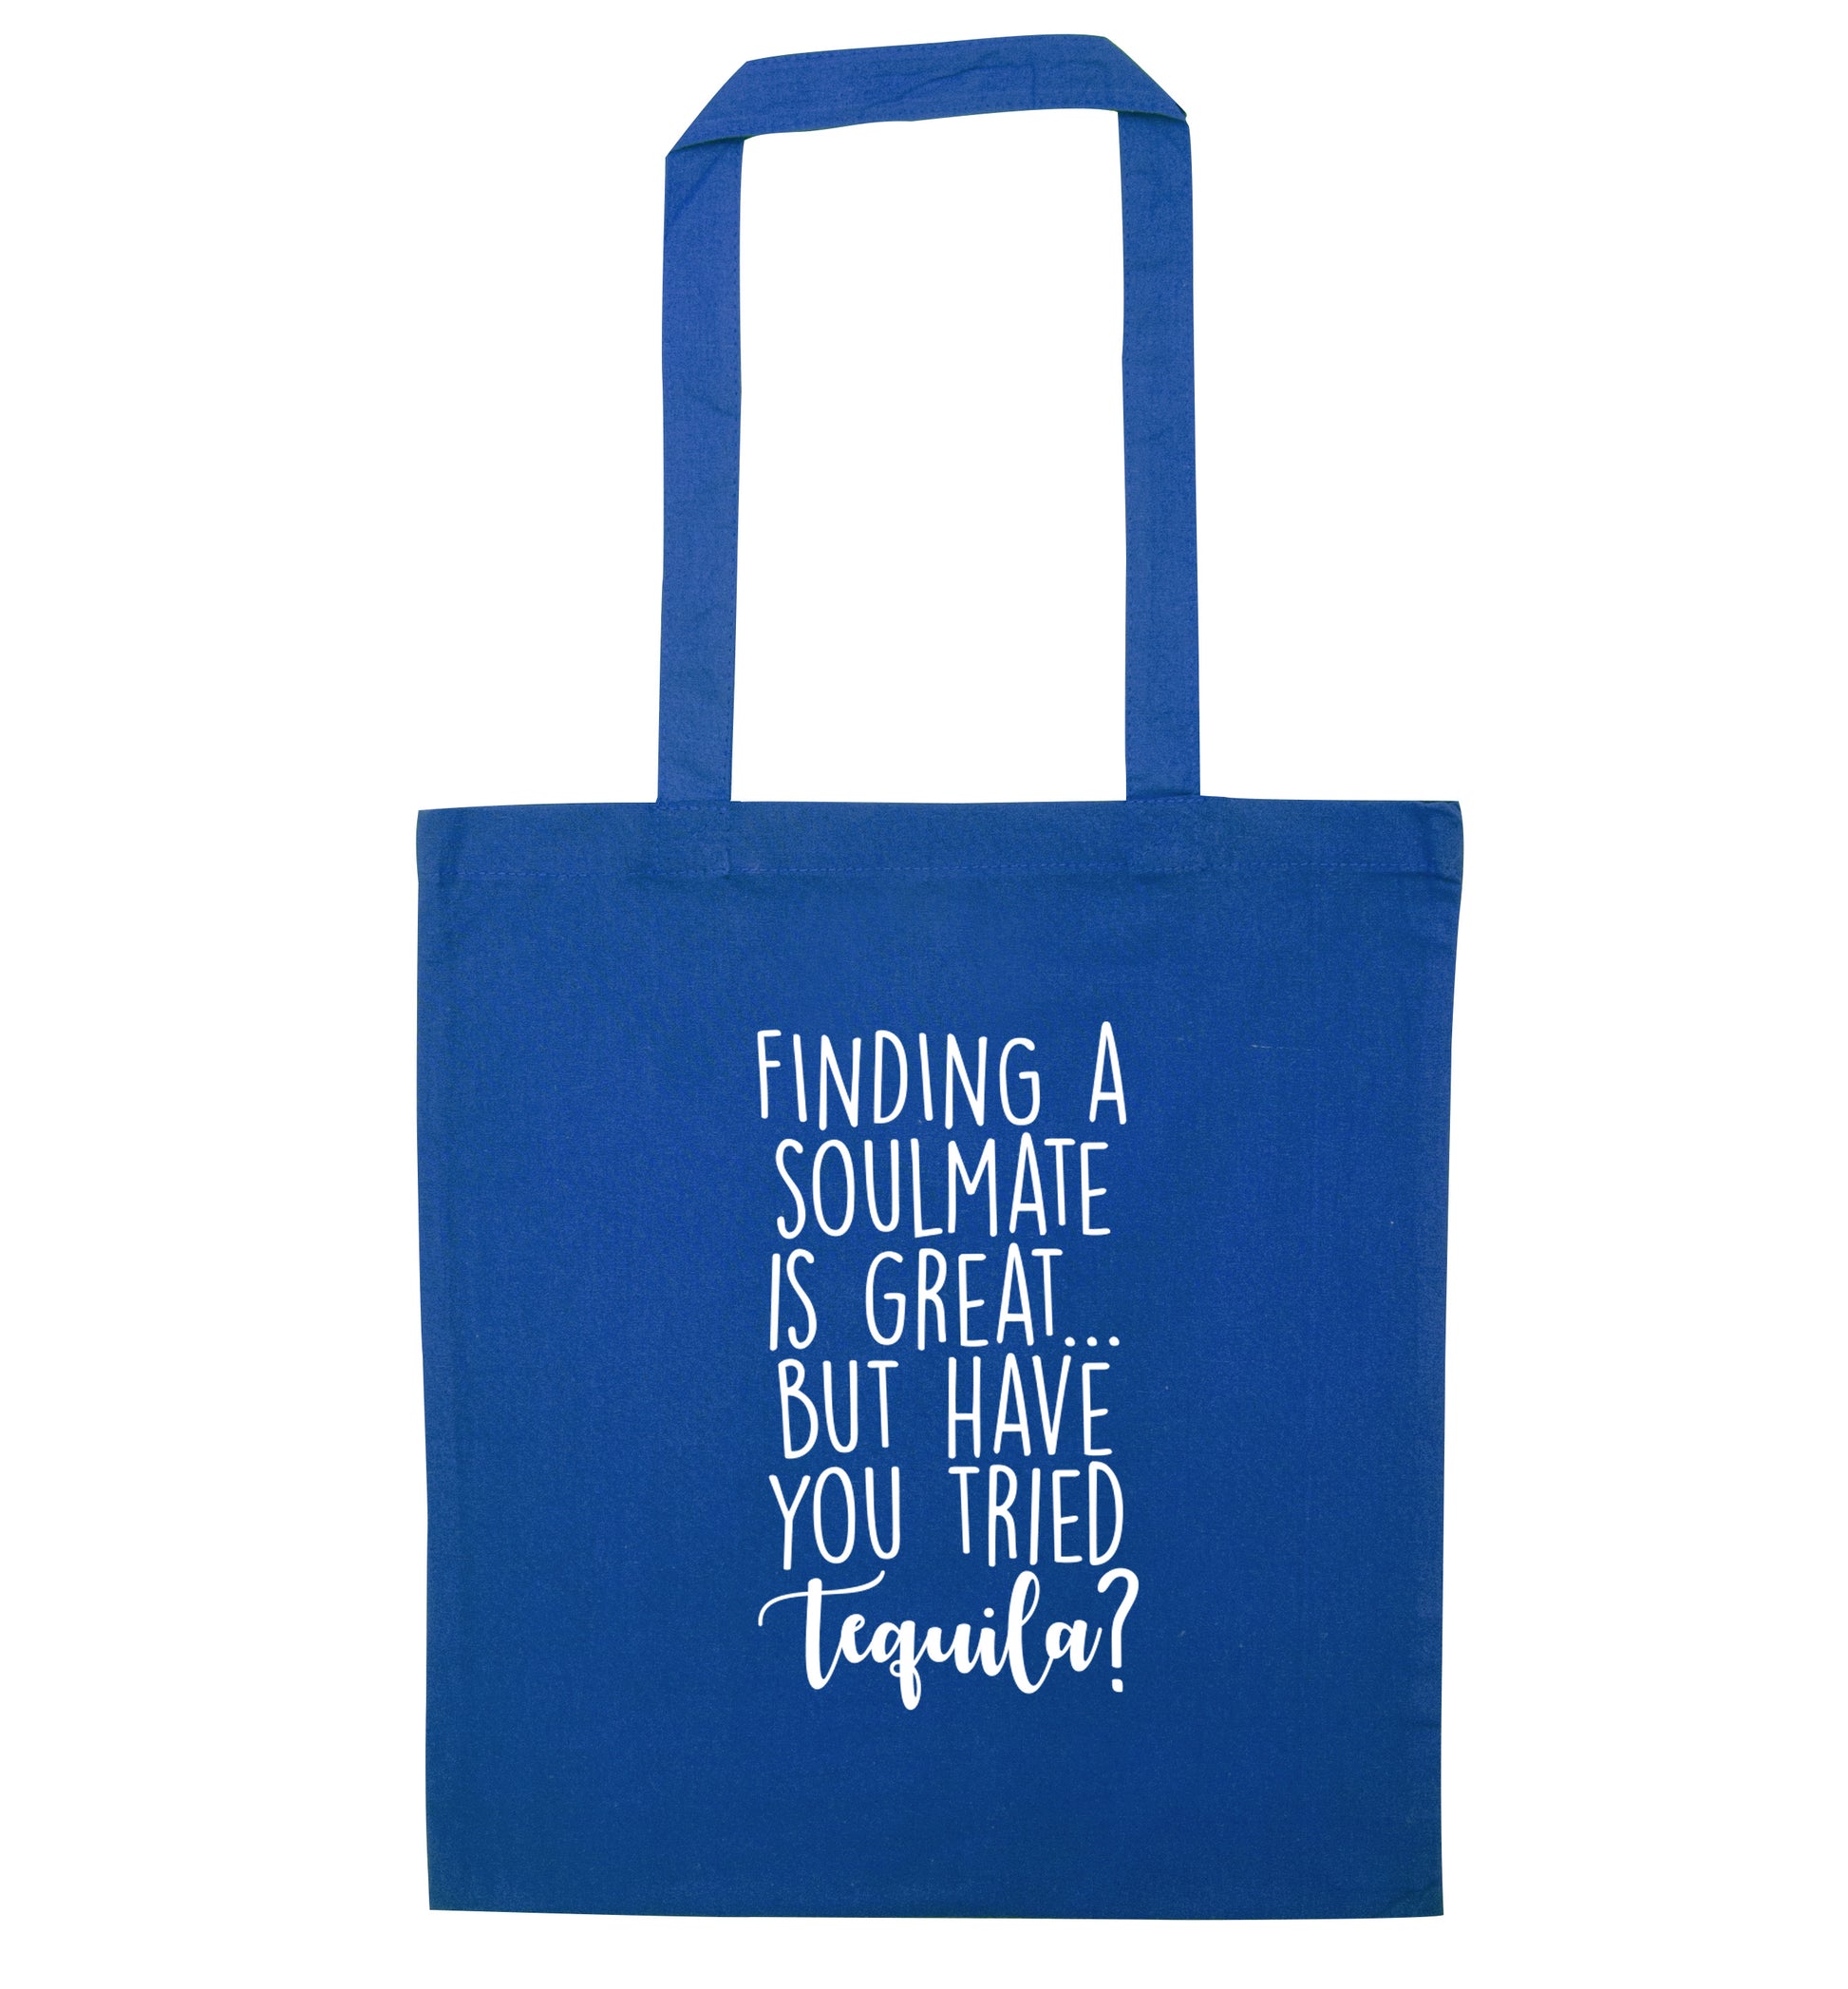 Finding a soulmate is great but have you tried tequila? blue tote bag